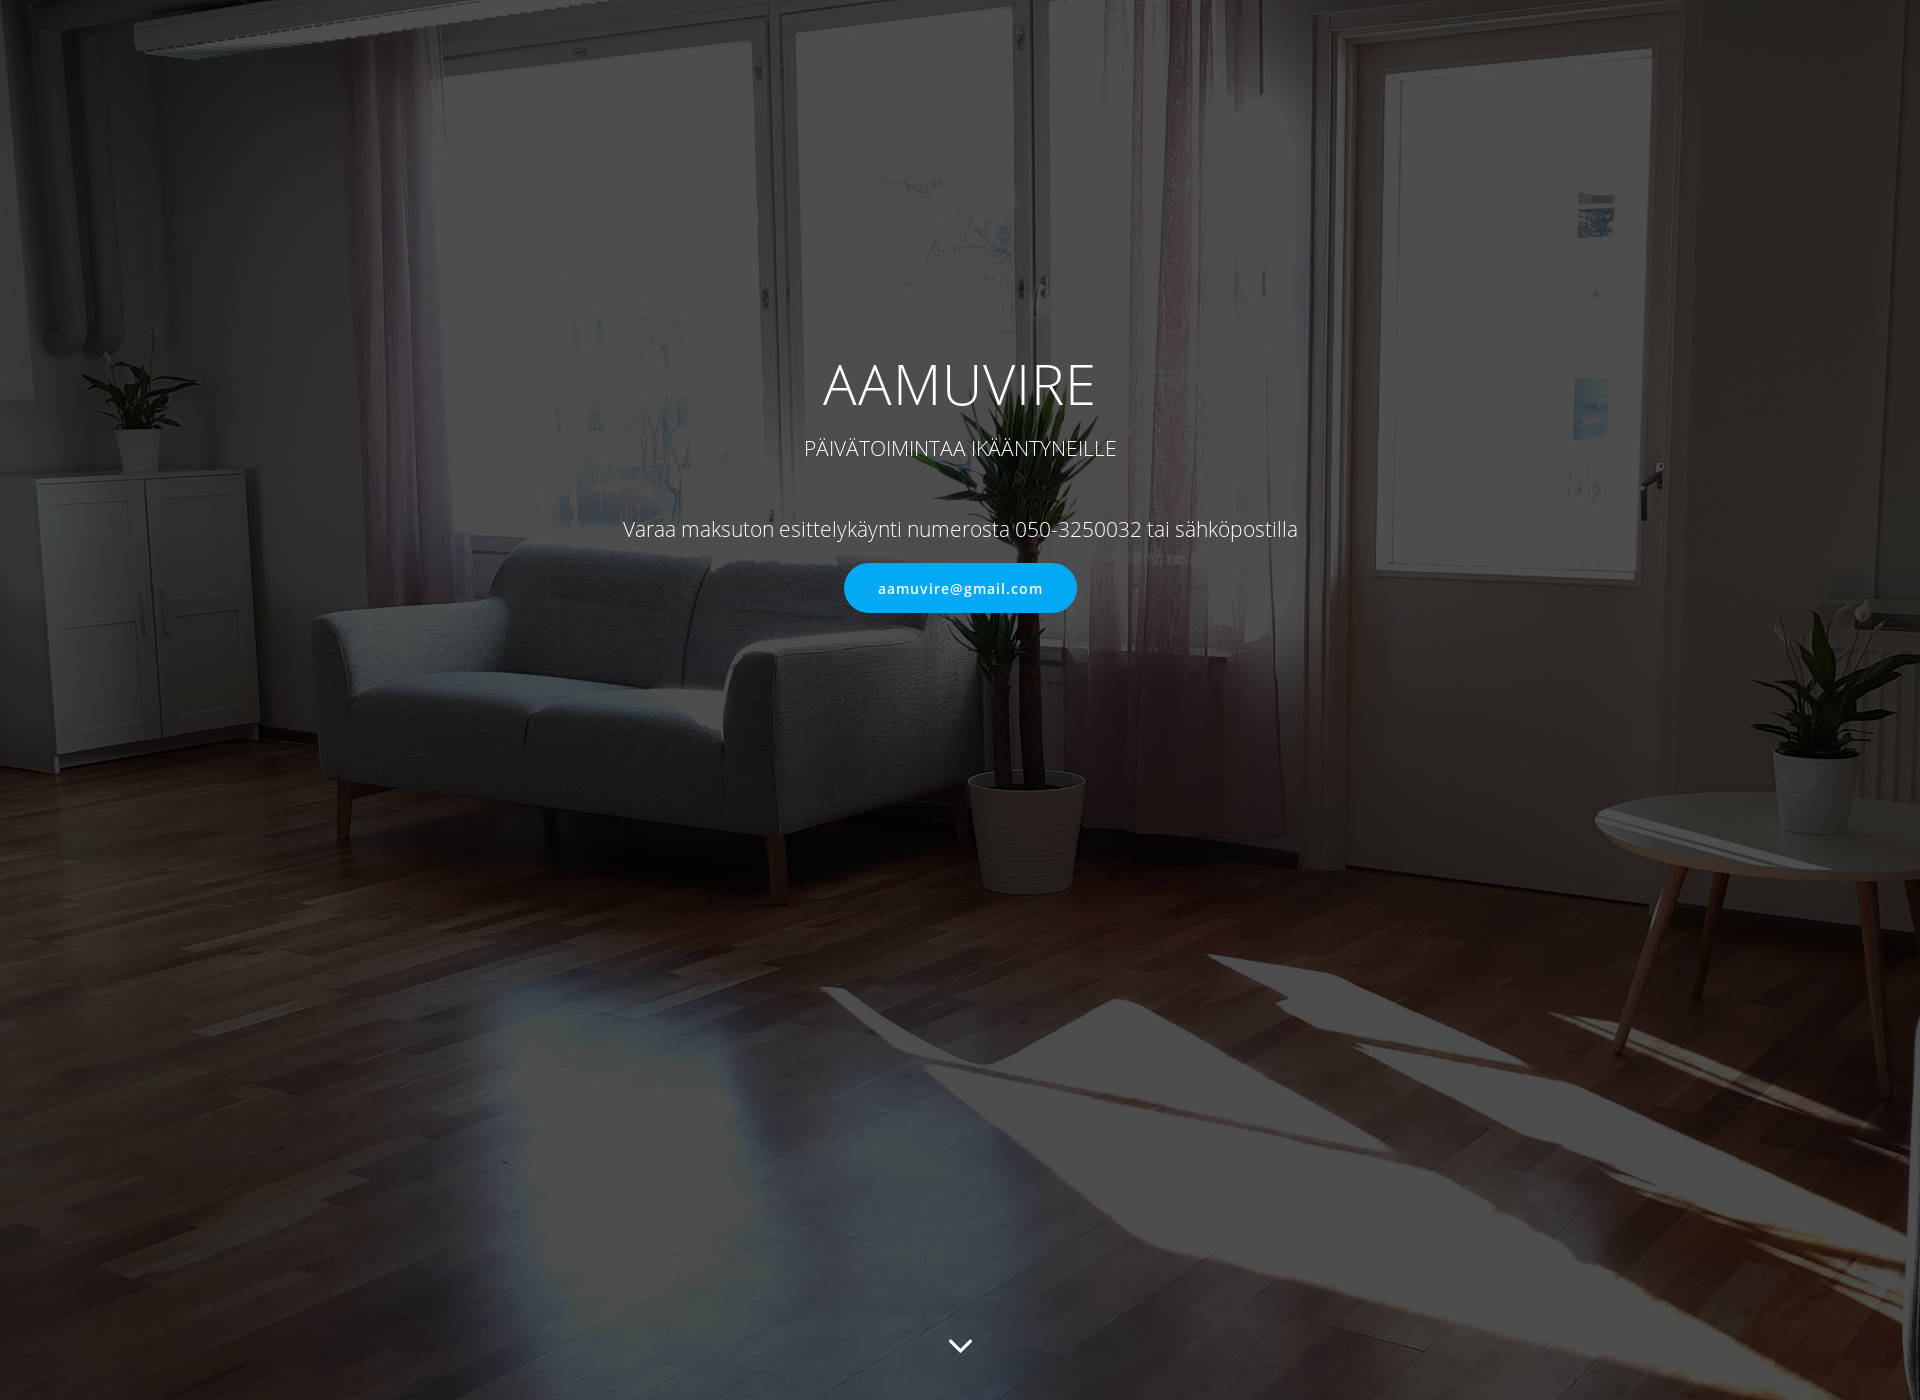 Screenshot for aamuvire.fi